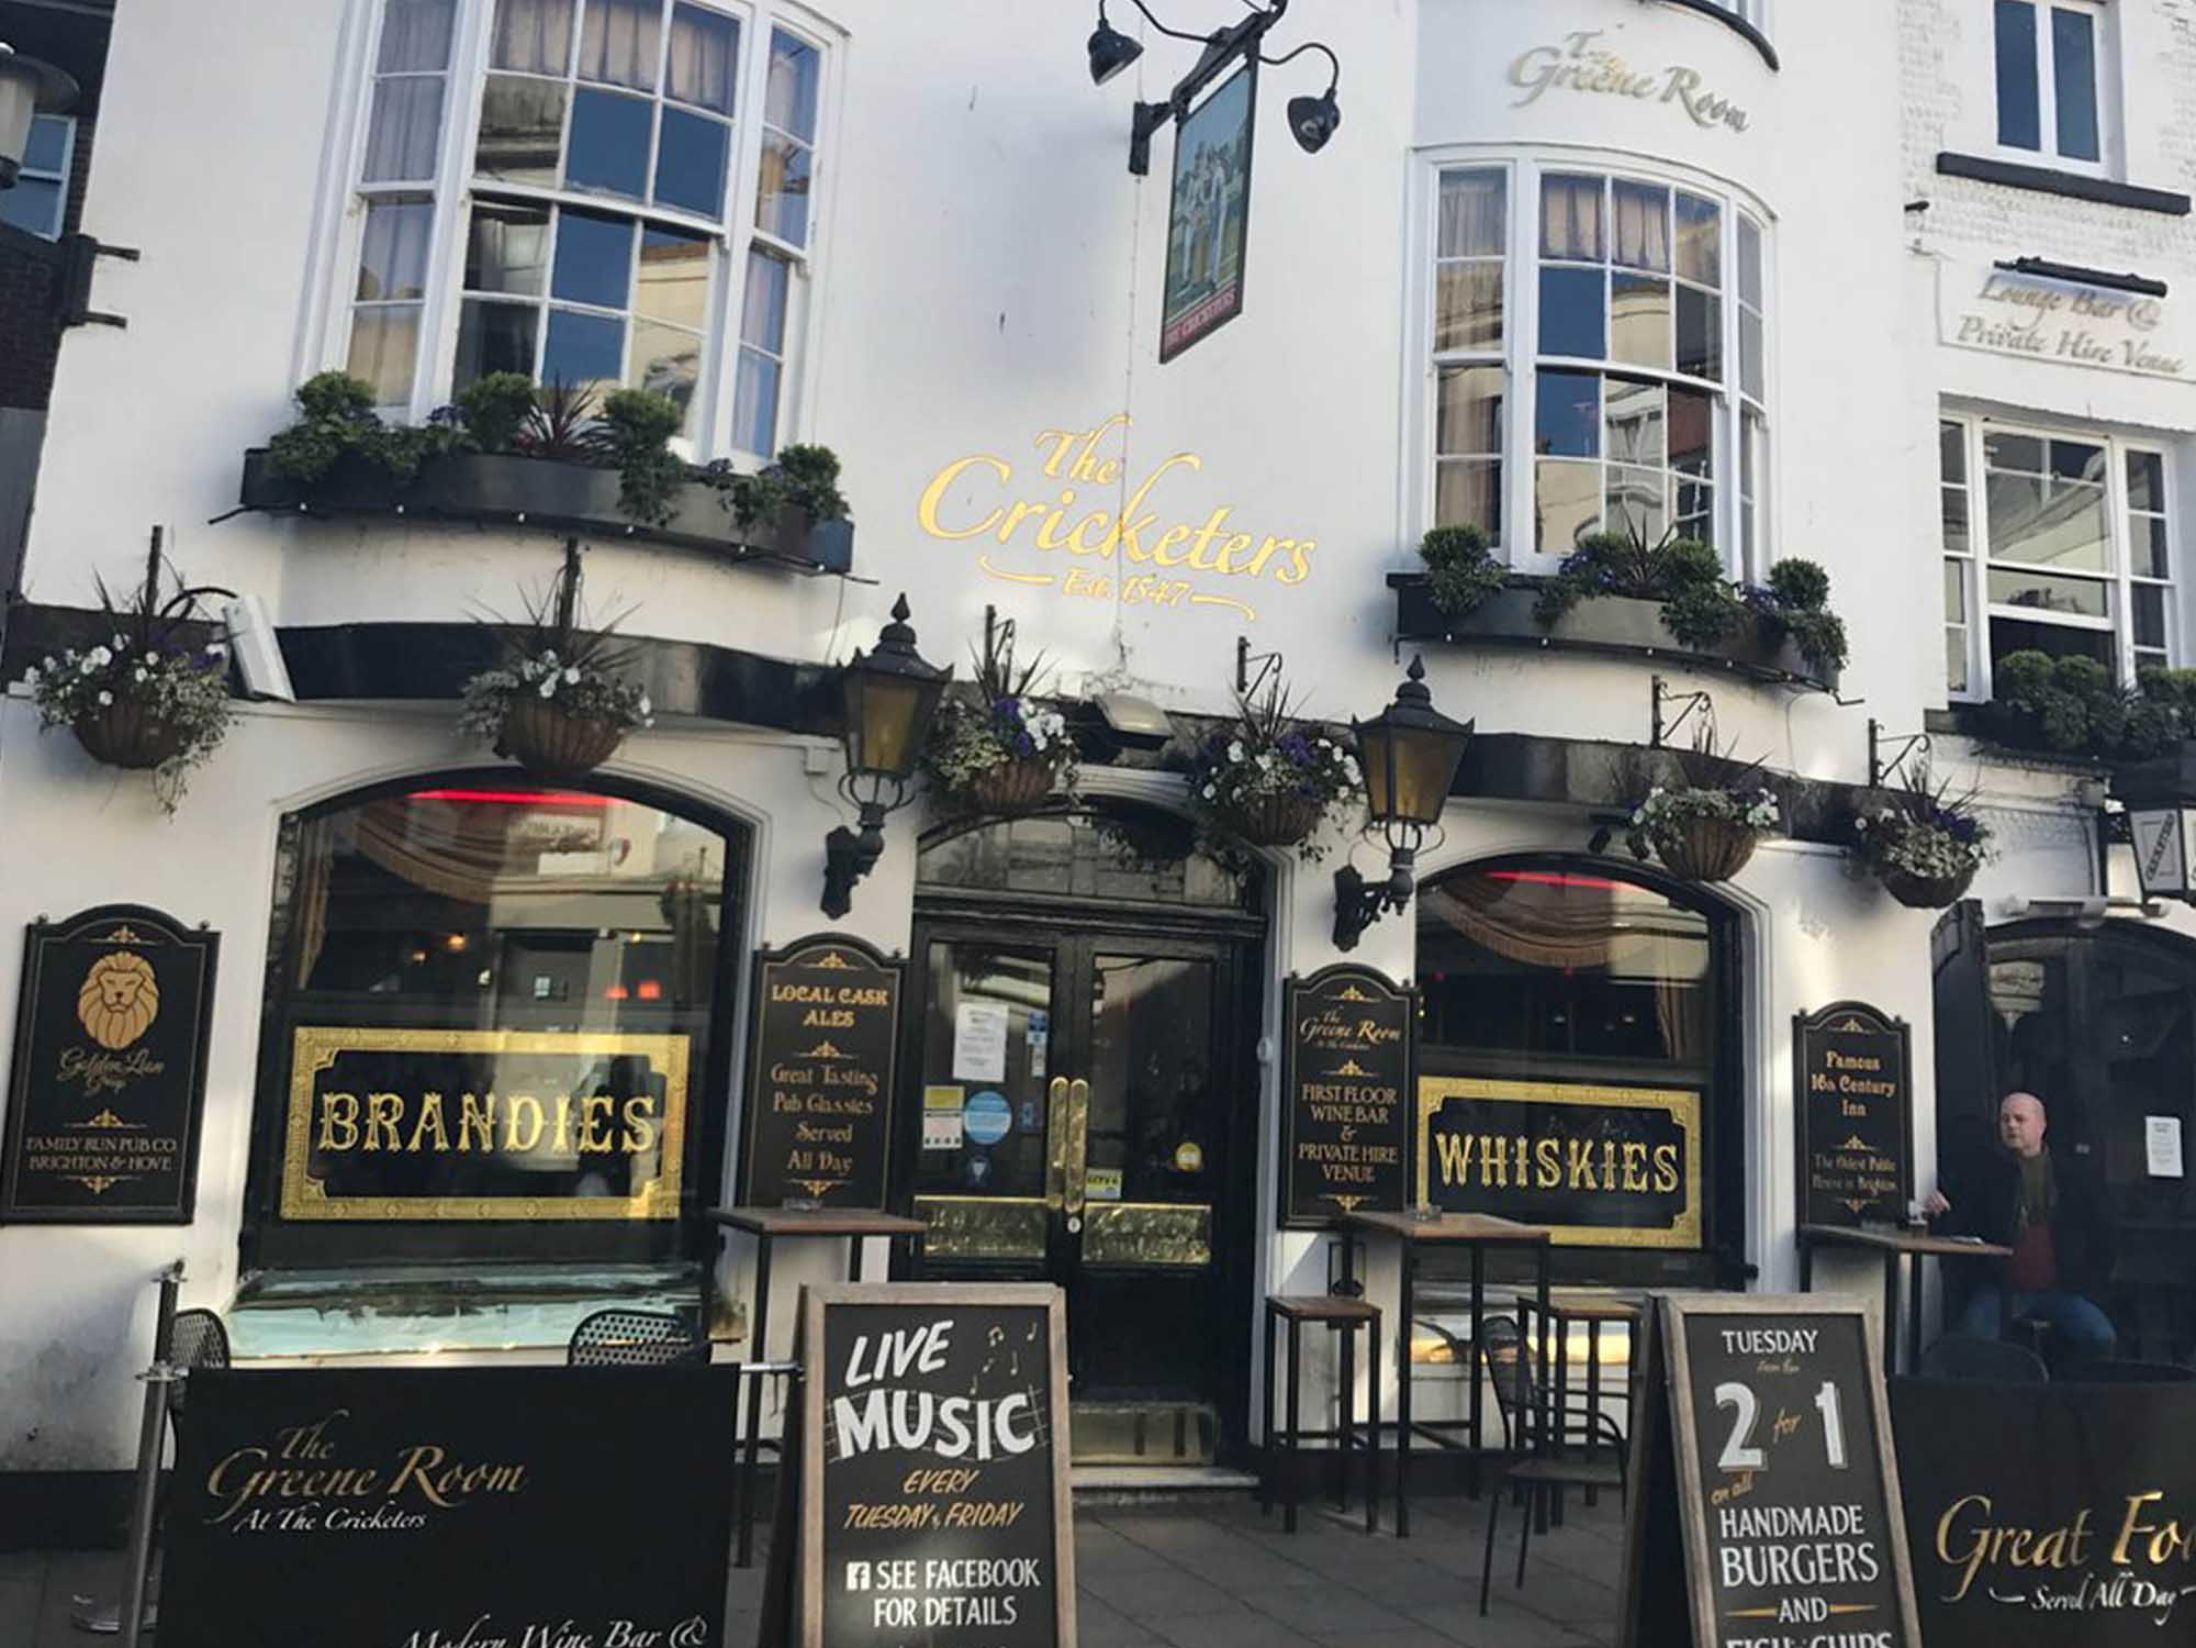 Best Pubs in Brighton - The Cricketers